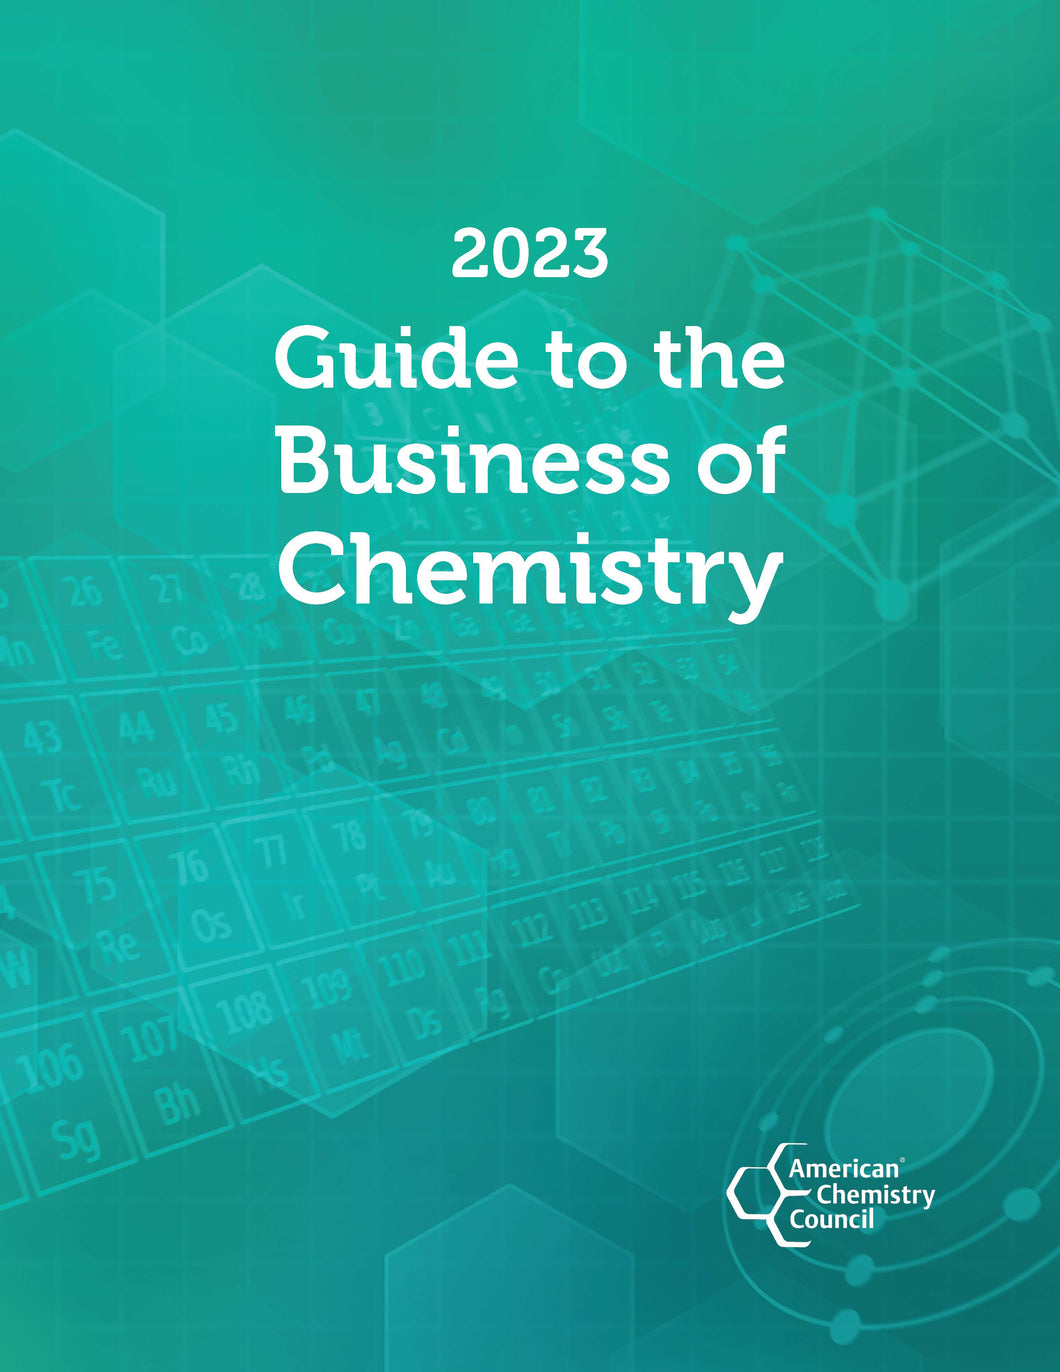 Guide to the Business of Chemistry - 2023